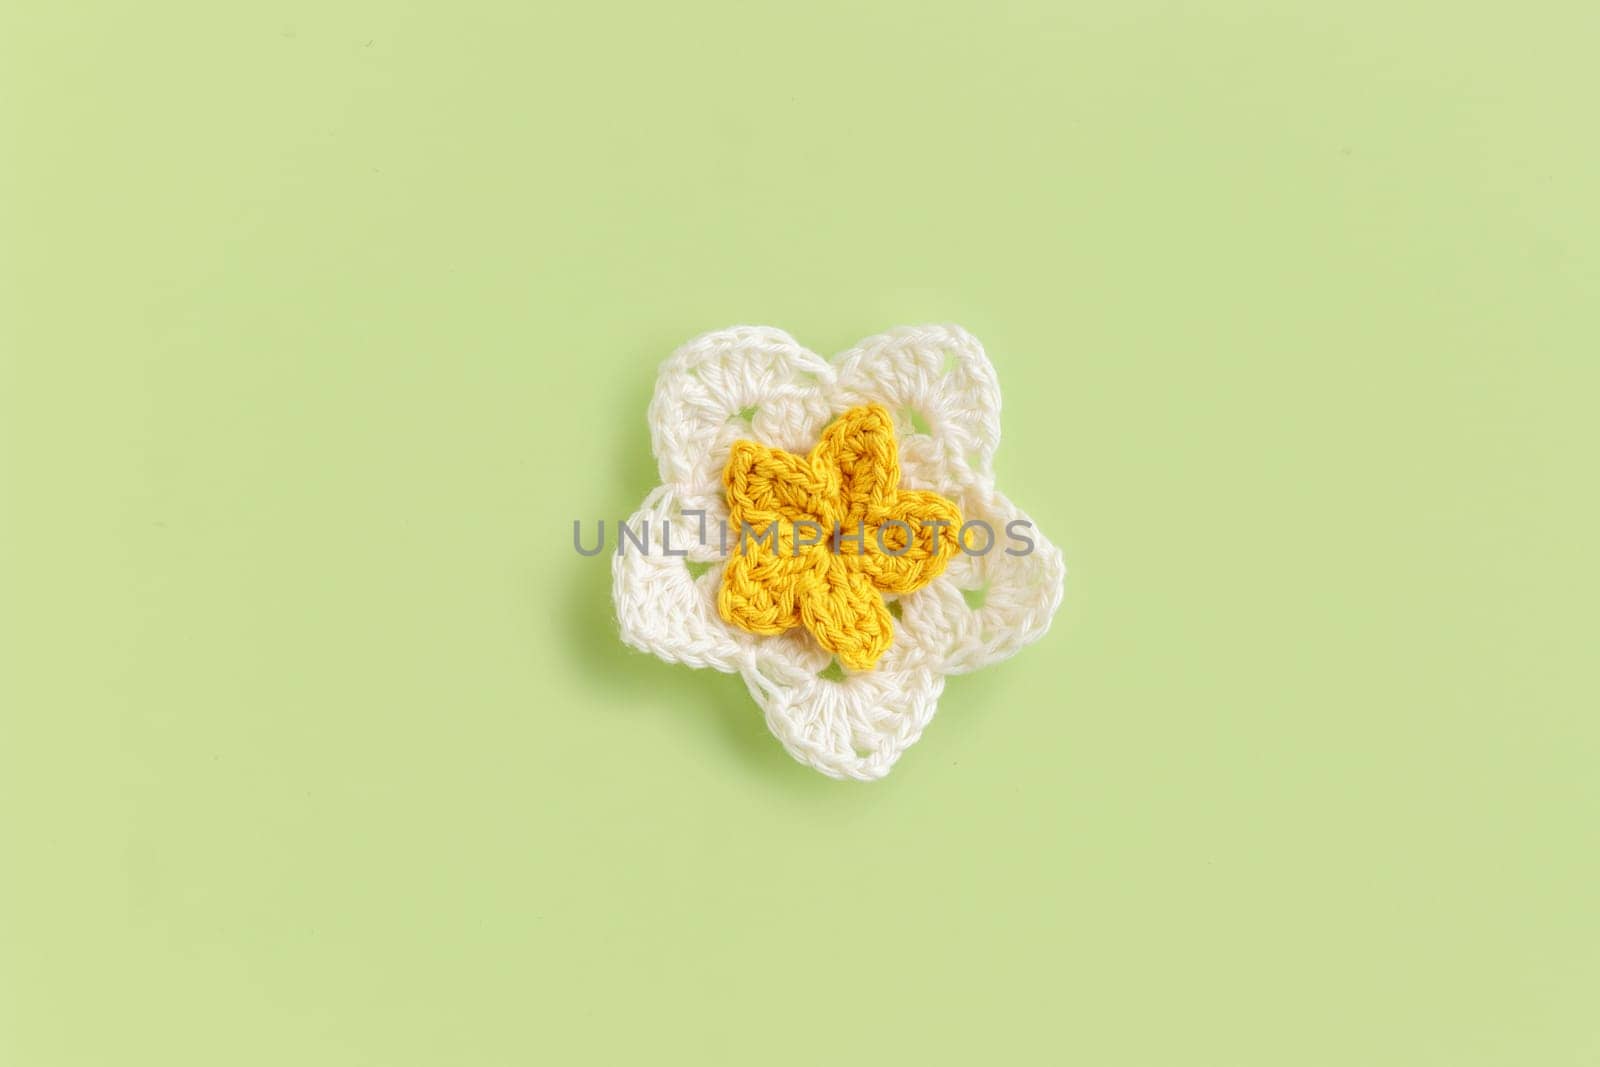 Yellow crocheted flower on a green background